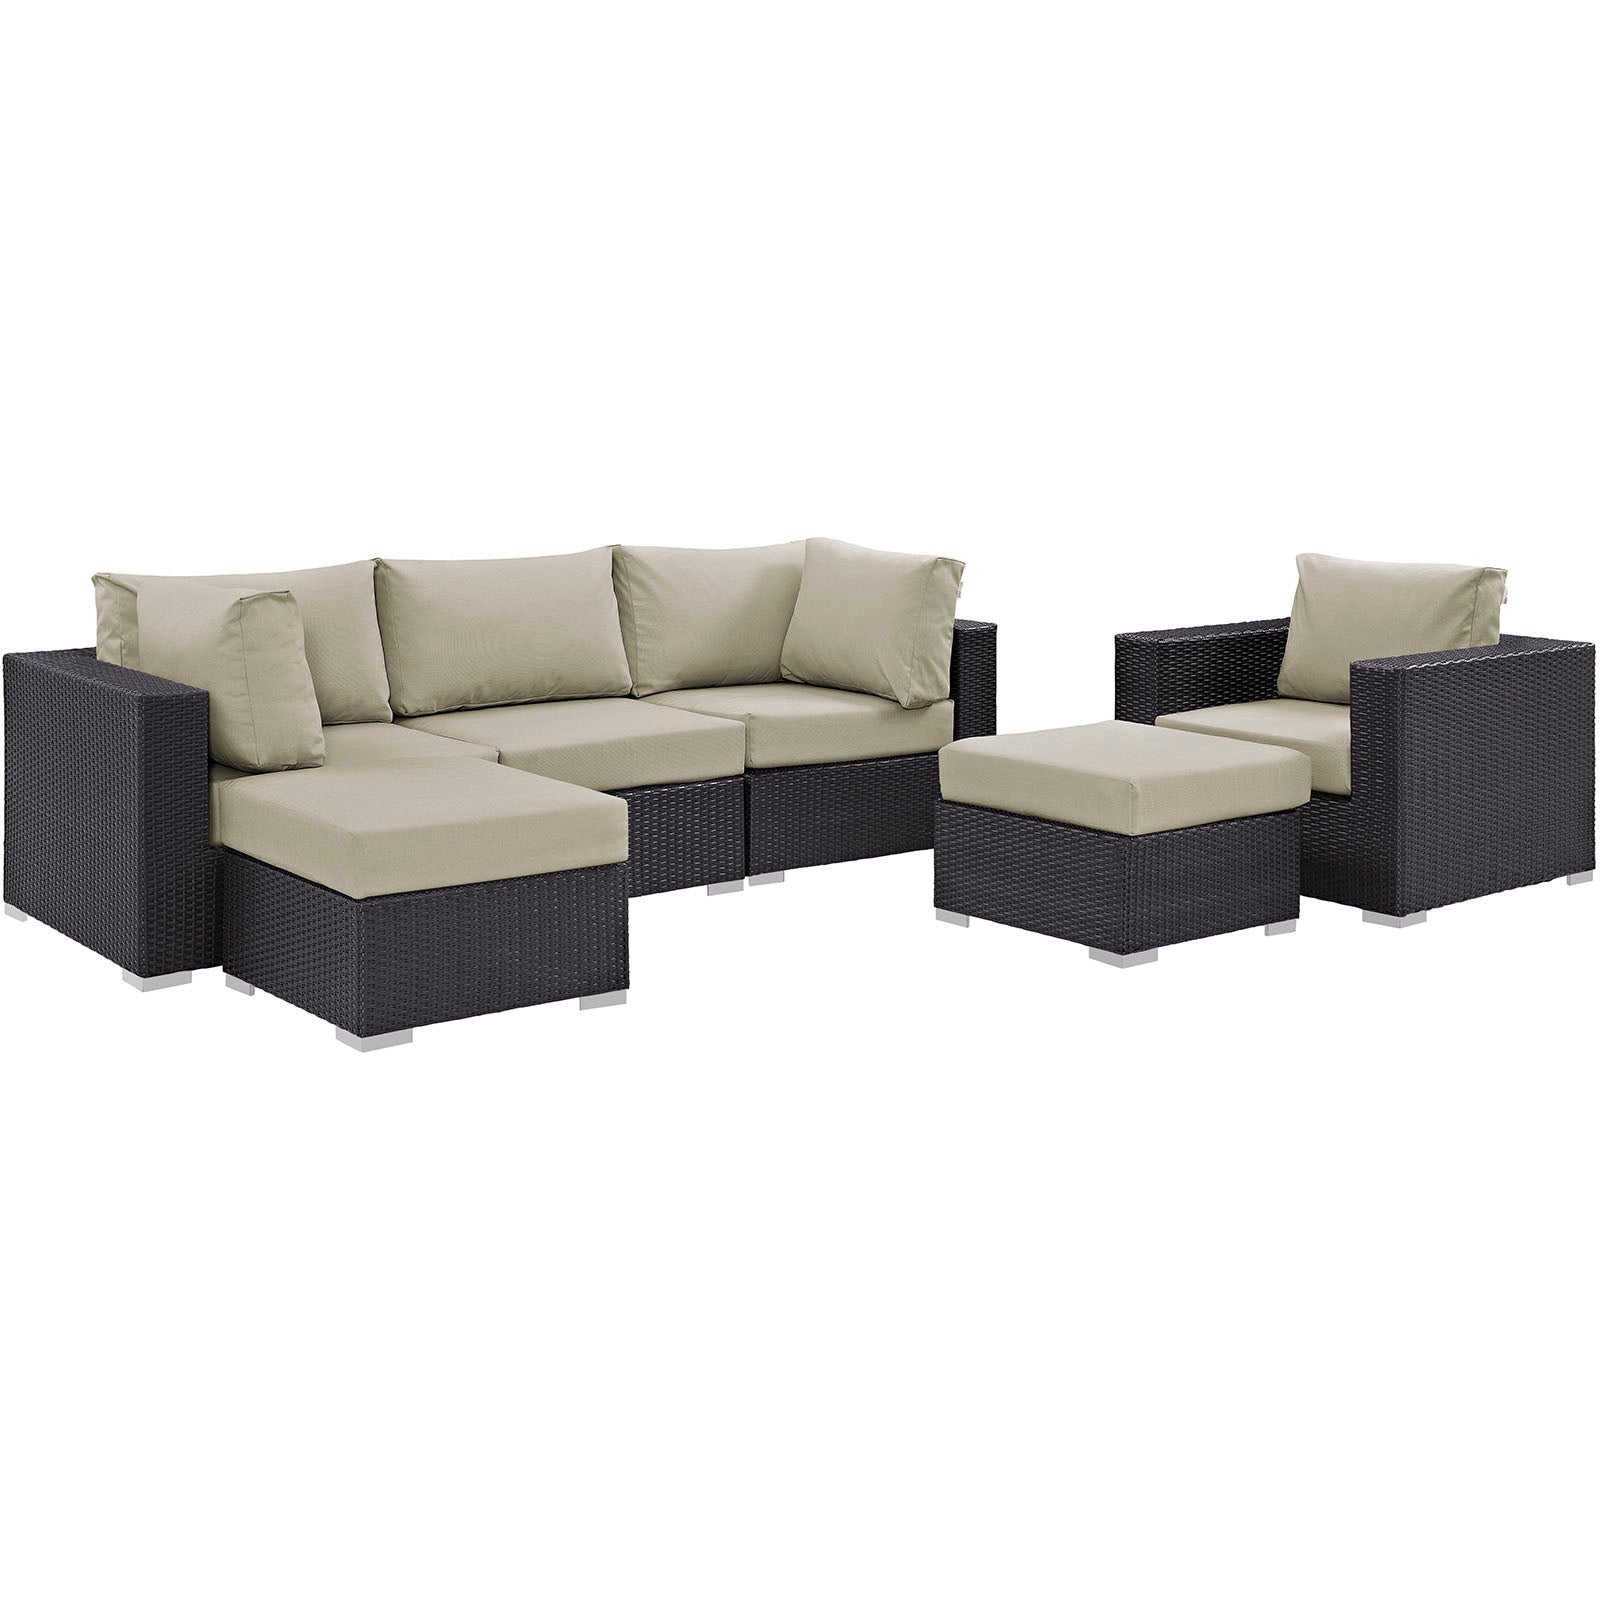 Convene 6 Piece Outdoor Patio Sectional Set-Outdoor Set-Modway-Wall2Wall Furnishings